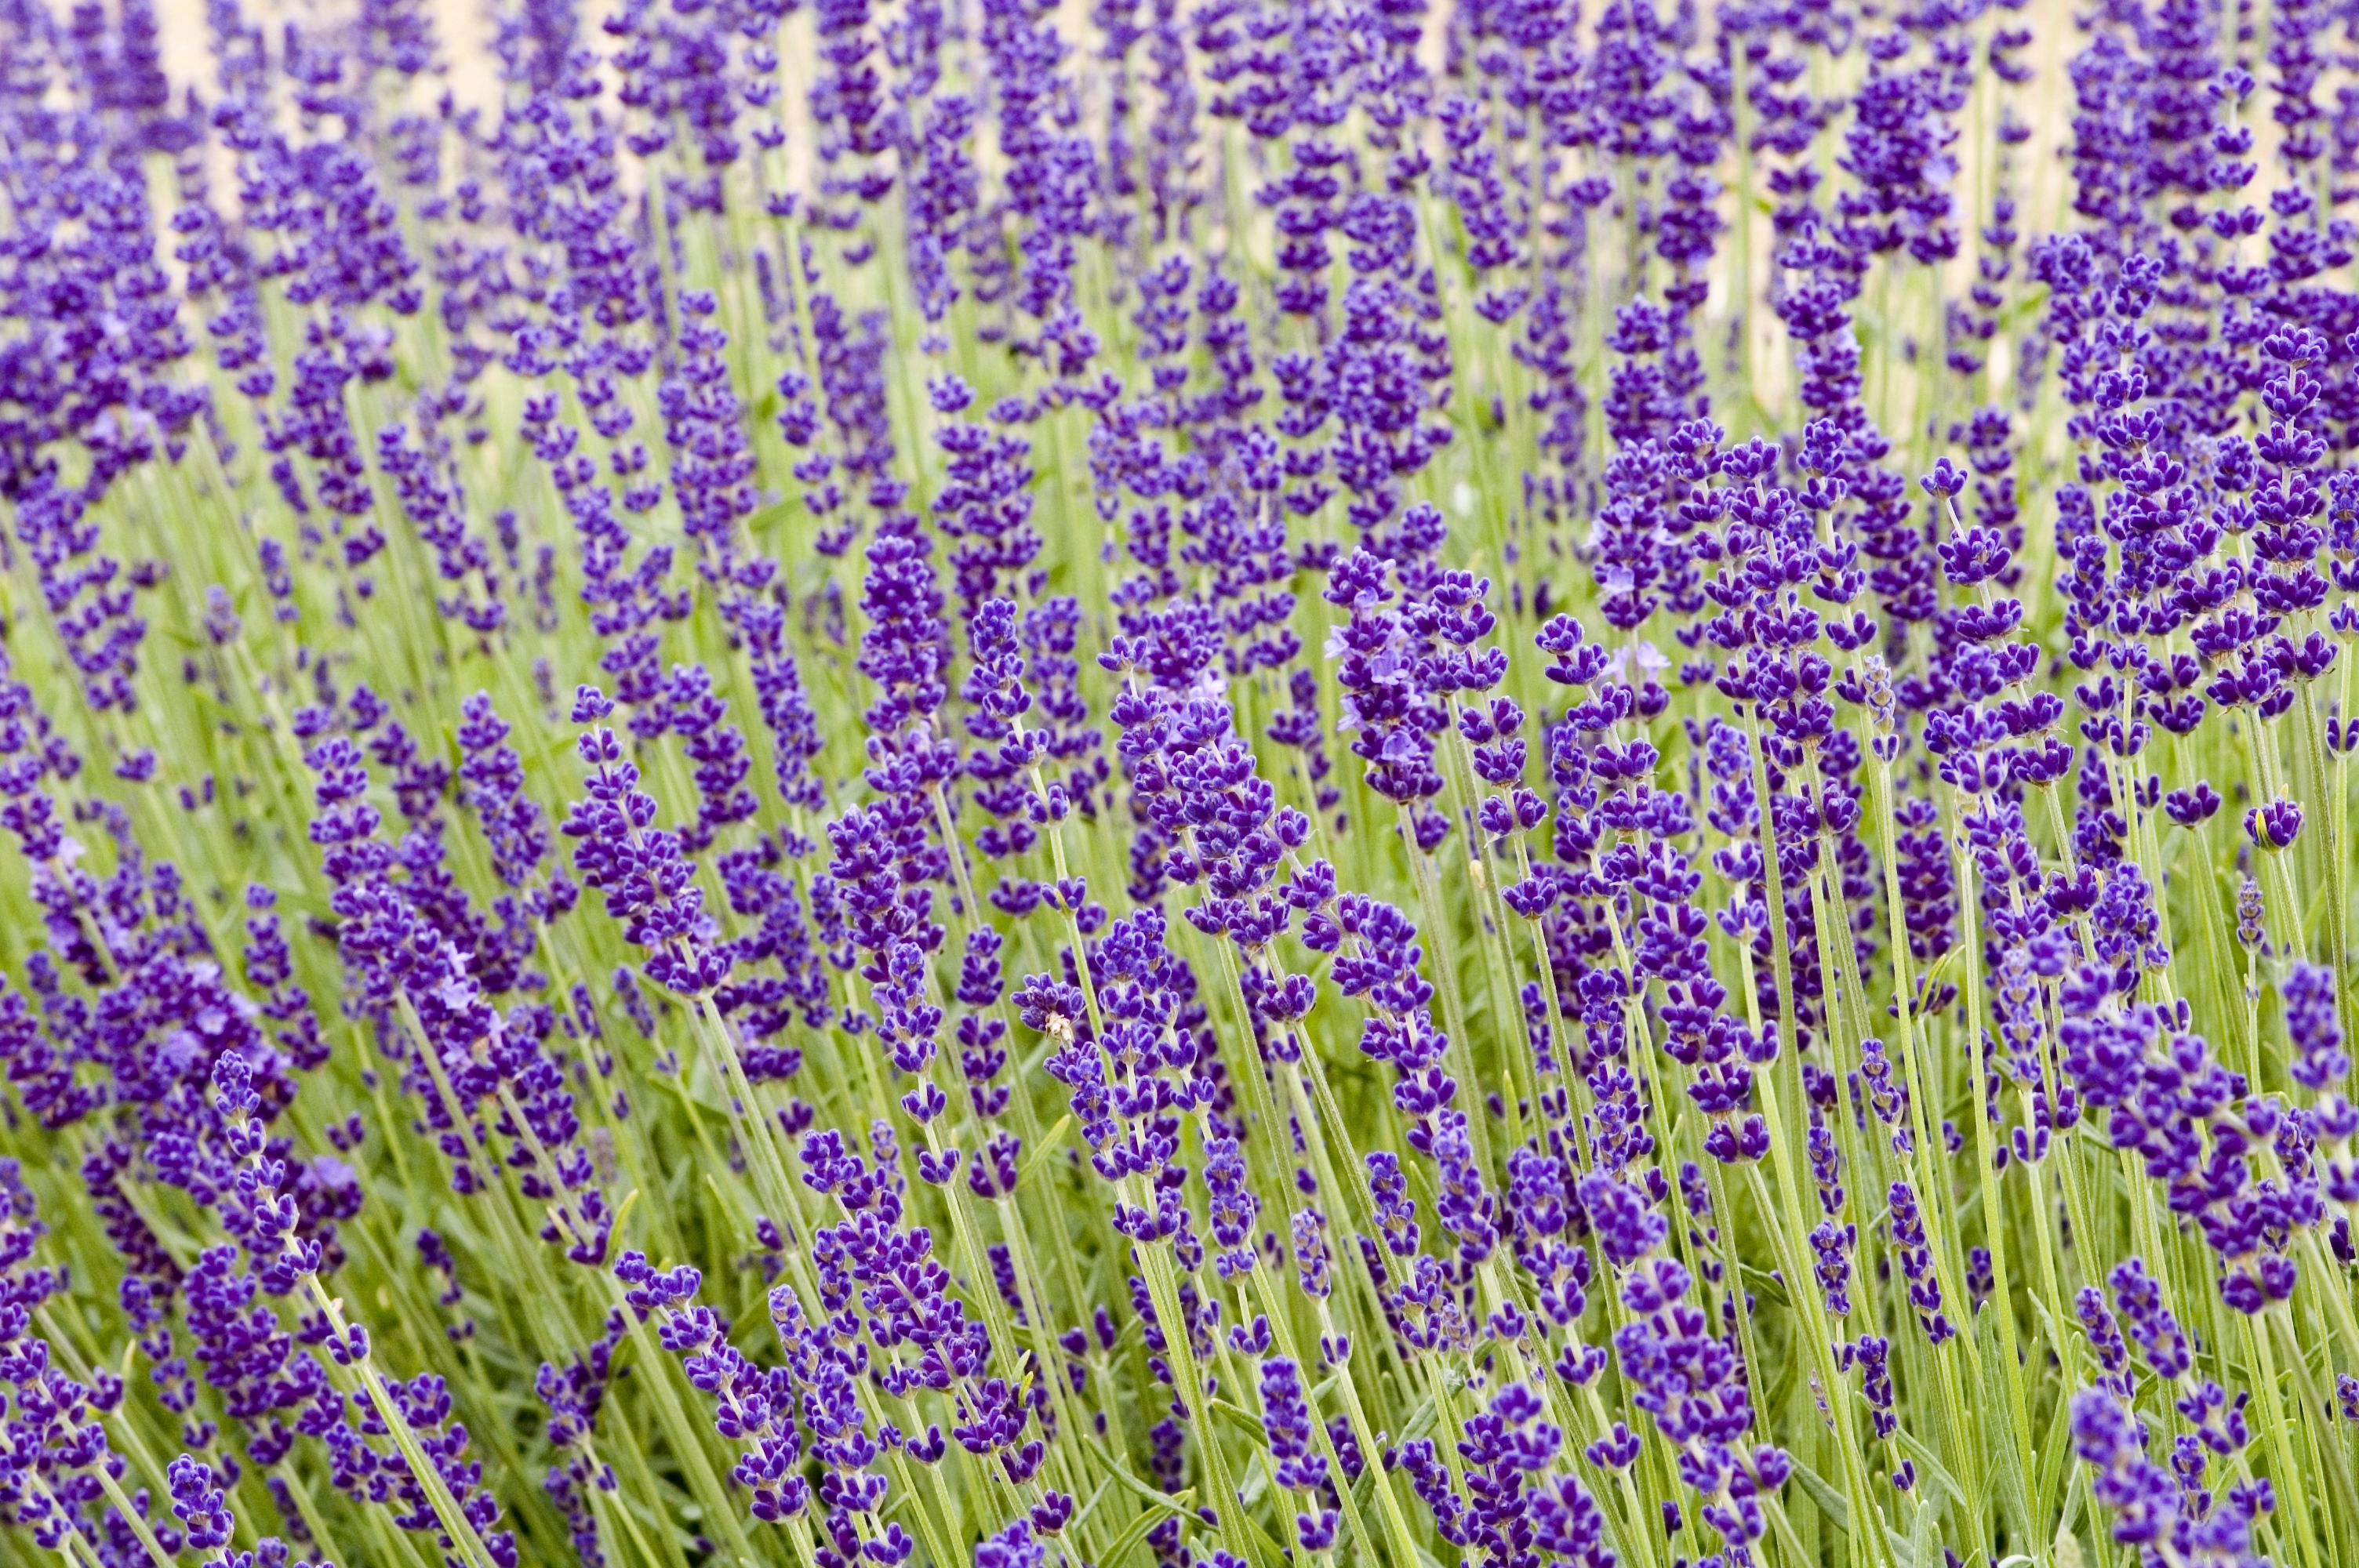 How to Grow and Care for Lavender Plants - Lavender Grow Guide